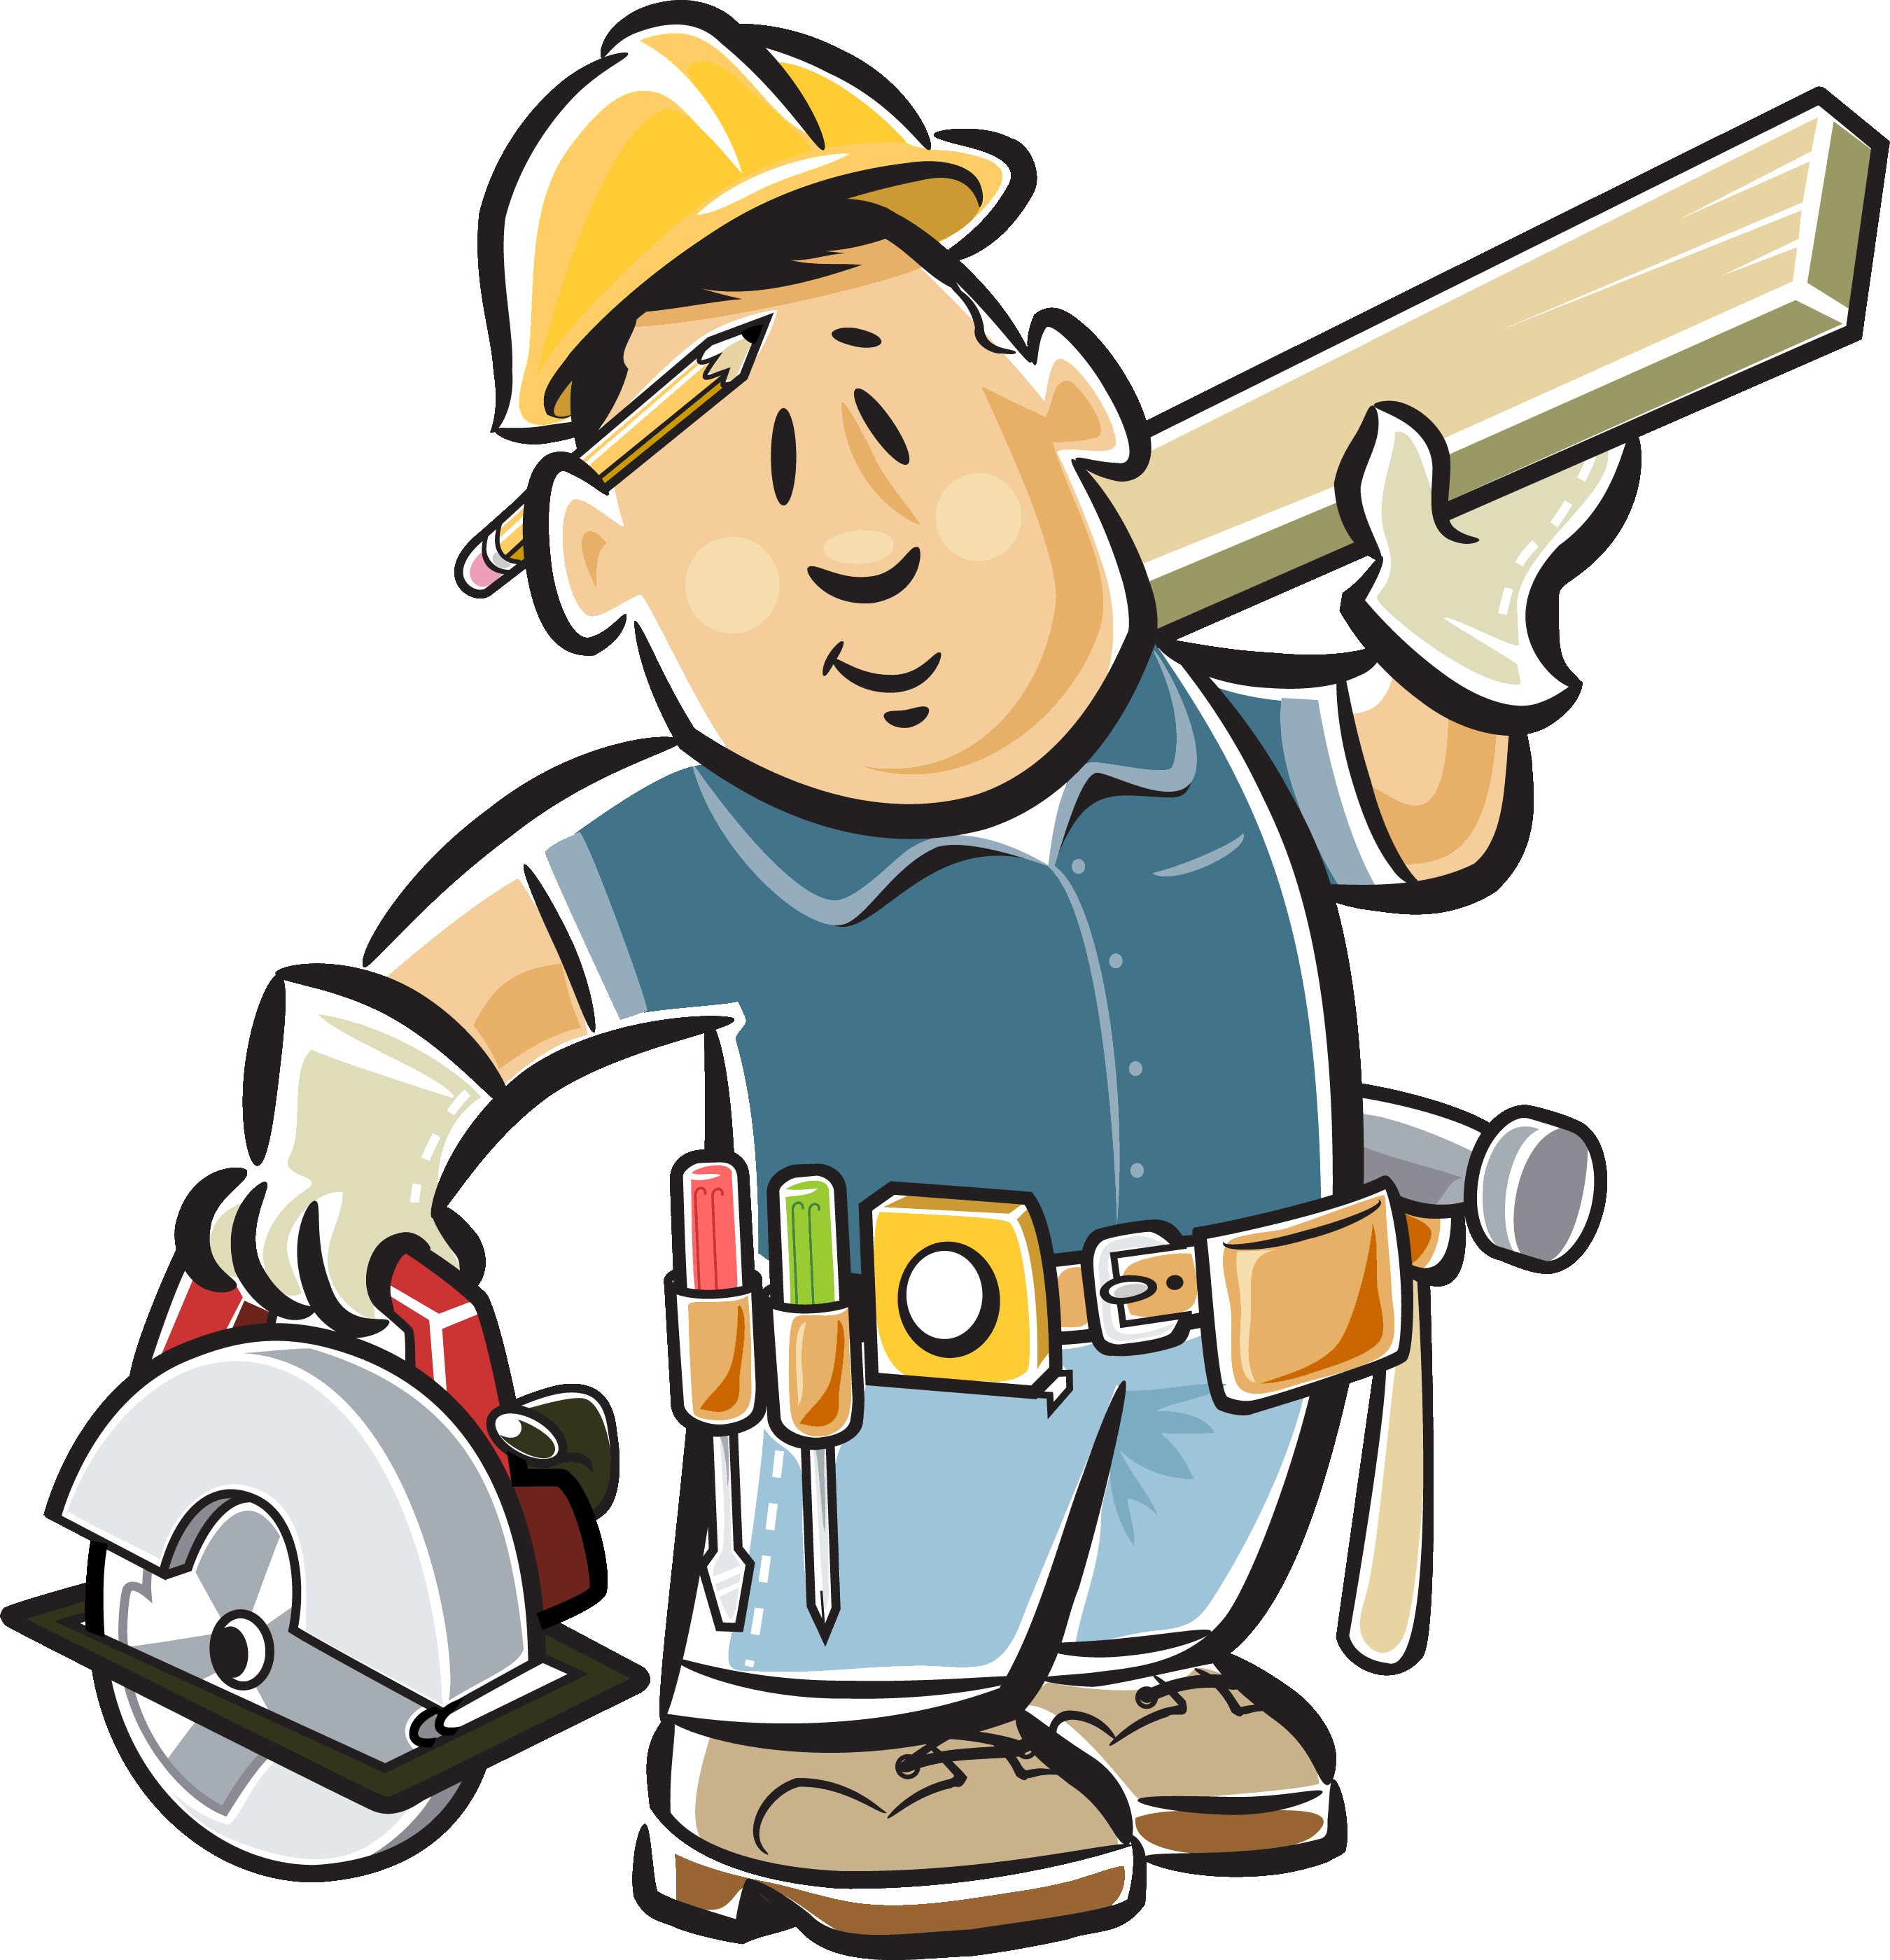 Free Home Renovation Cliparts, Download Free Clip Art, Free.